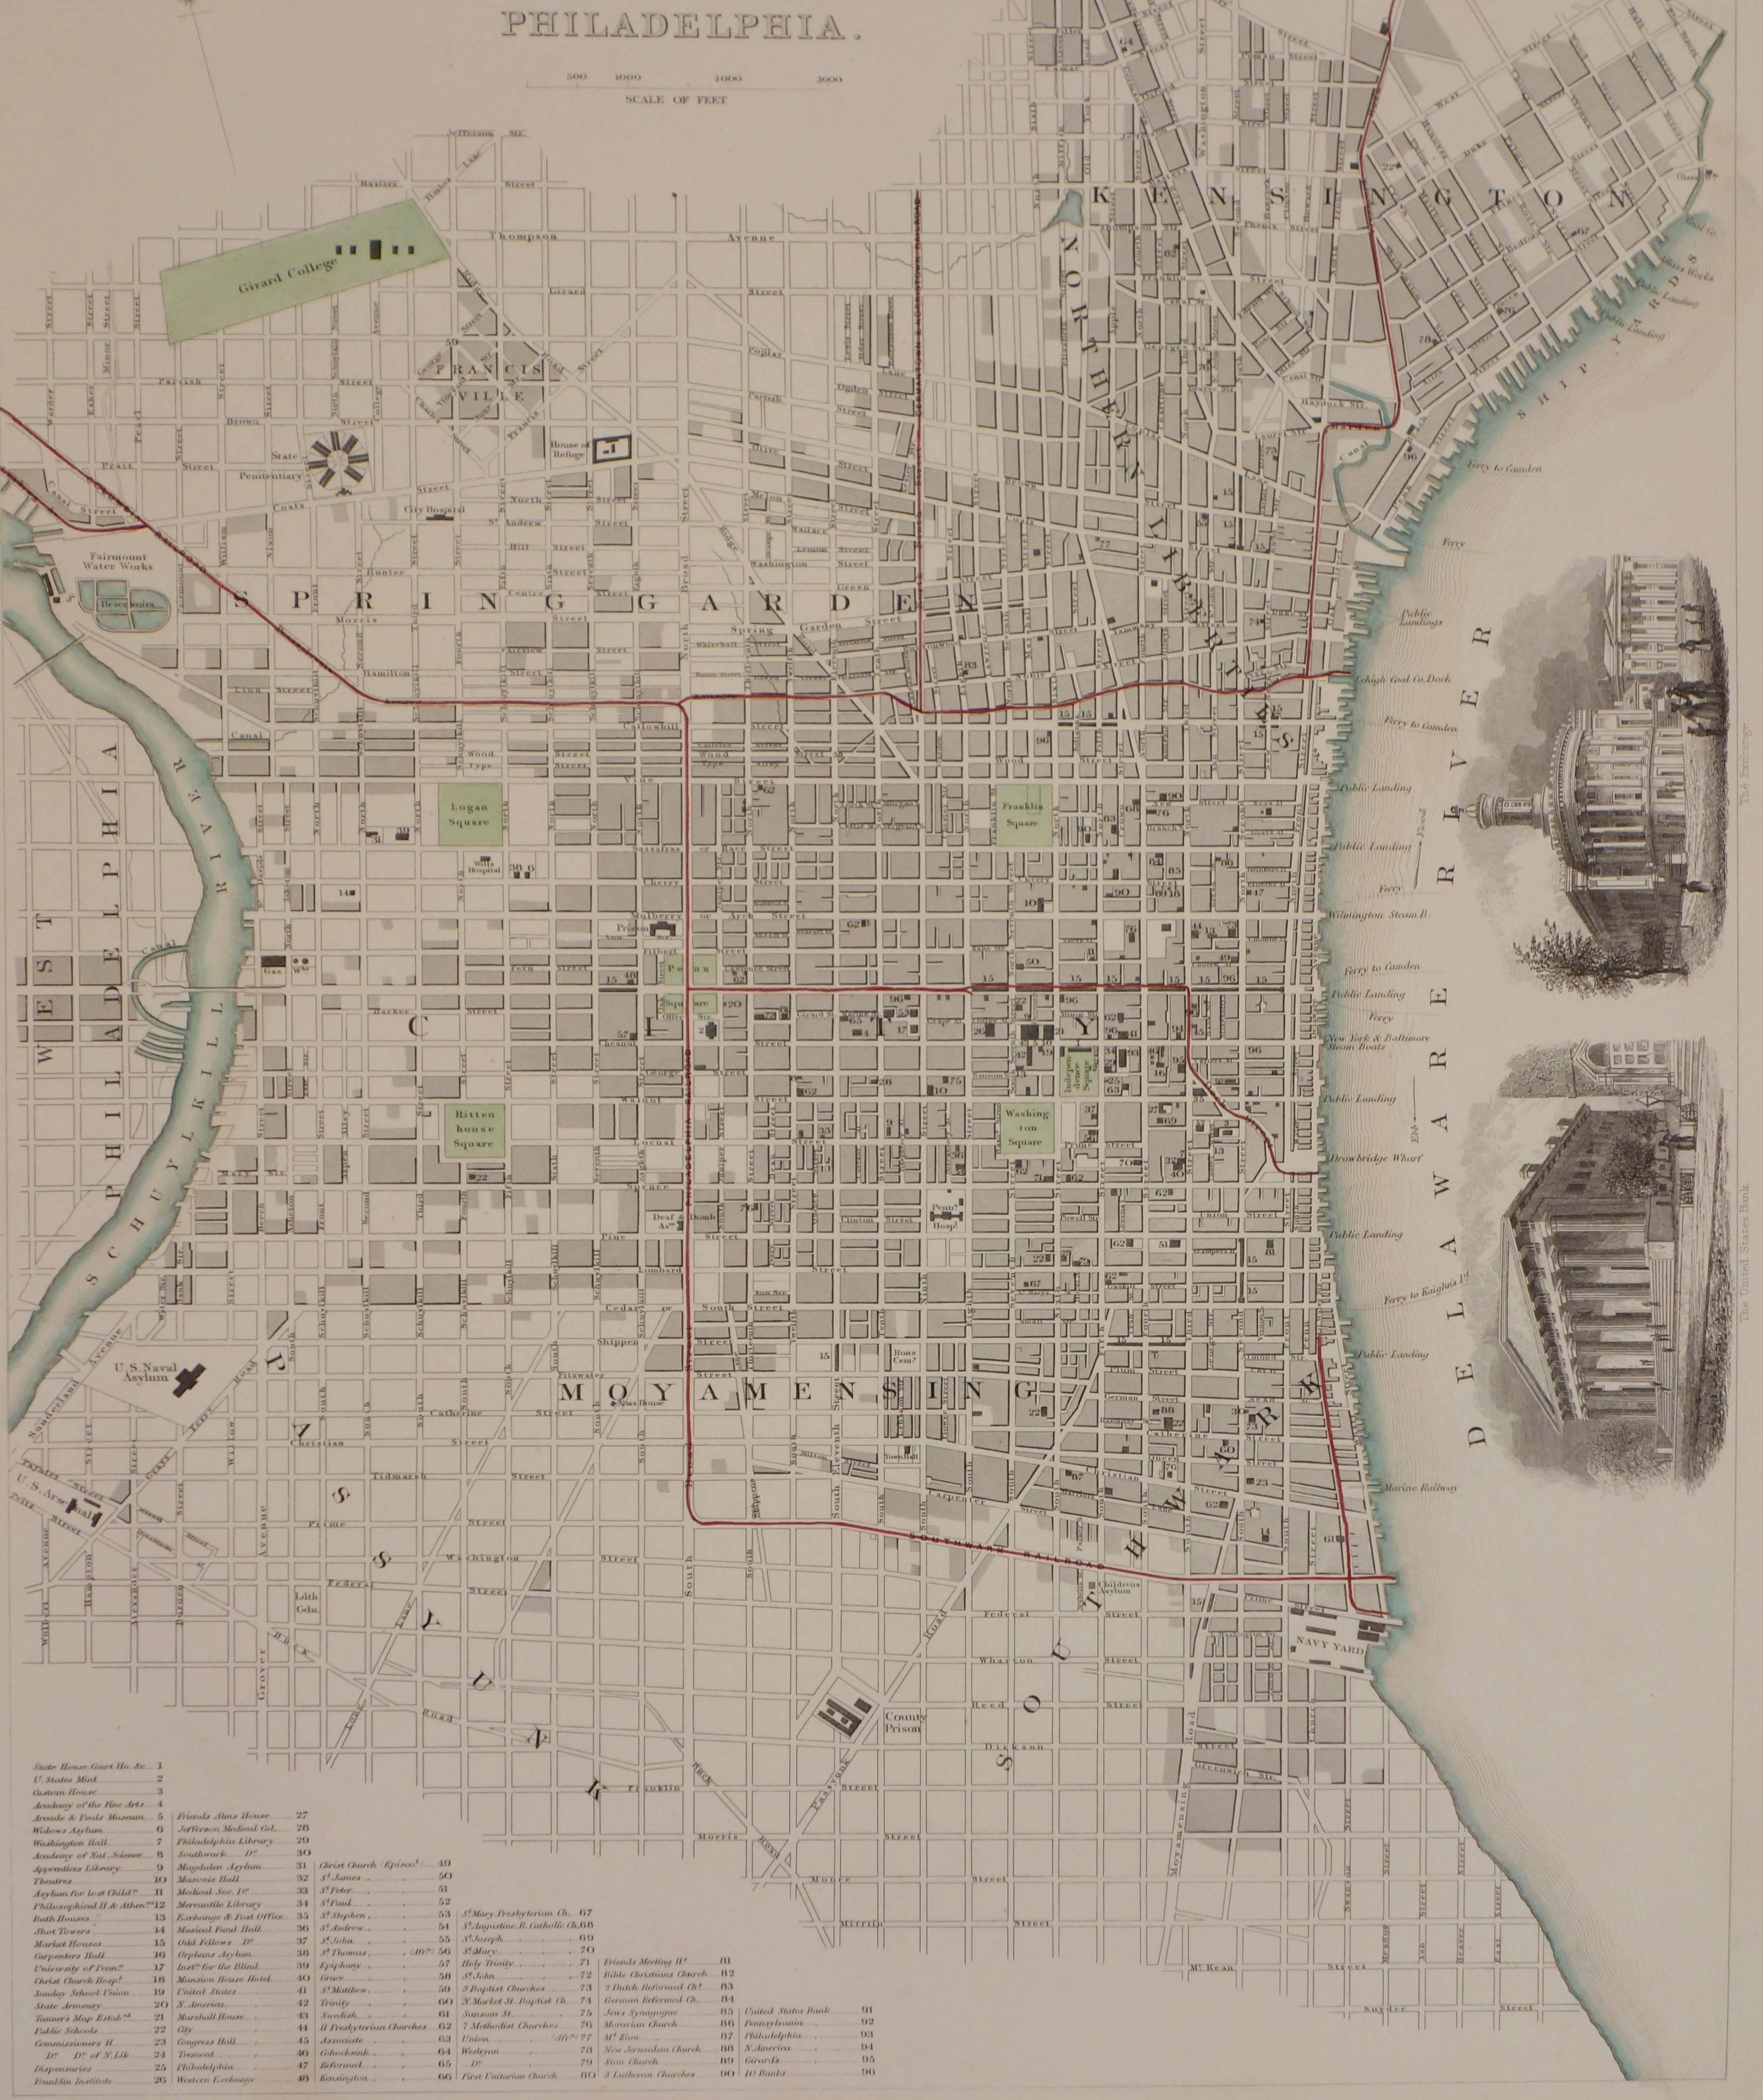 1844 Map of Philadelphia - Print by Unknown